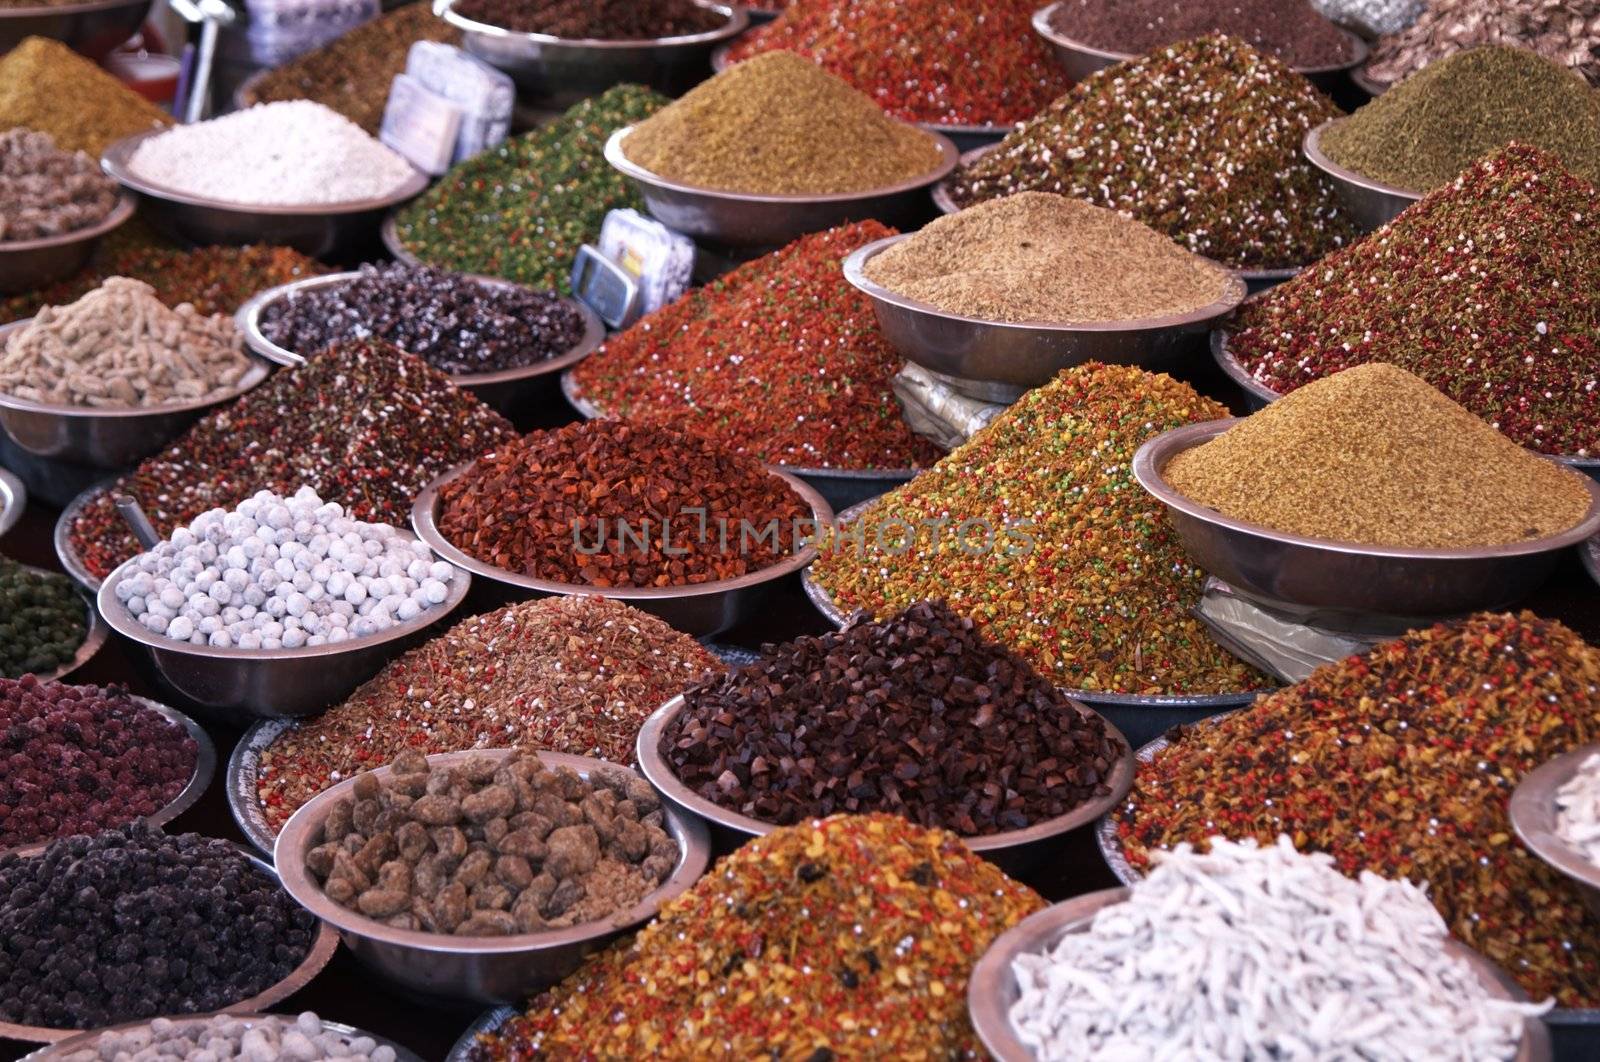 Bowls of pulses and spices on a market stall in Ahmadabad, Gujarat, India